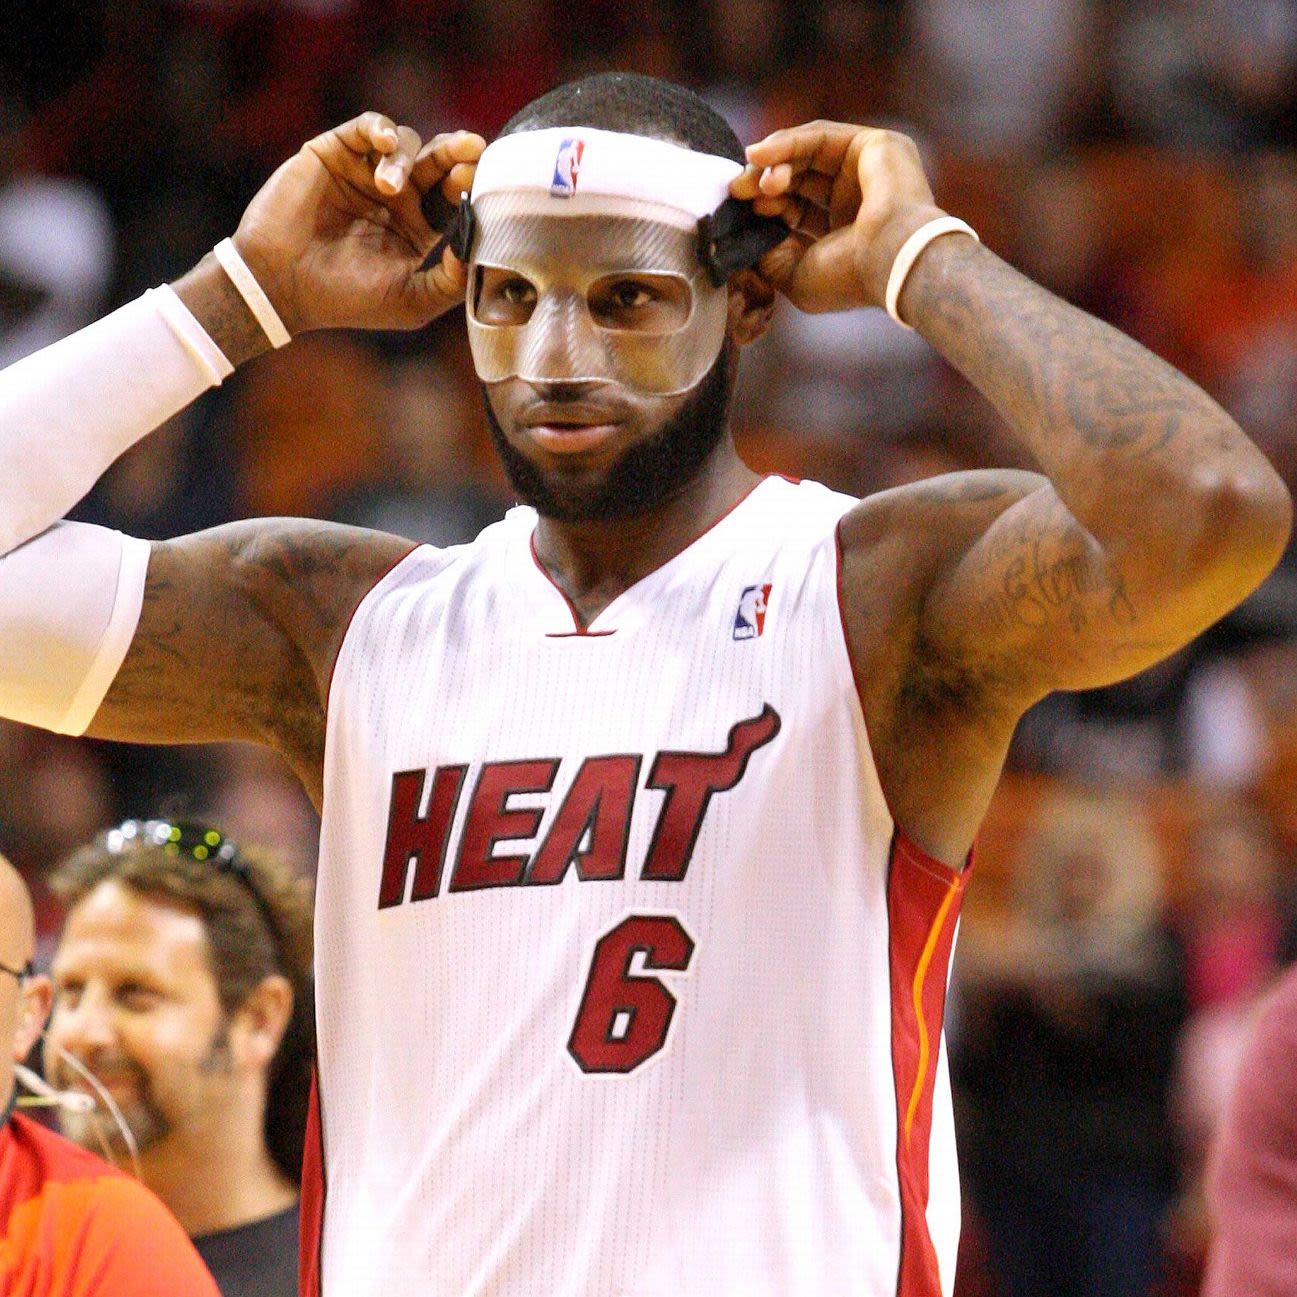 The NBA's Masked Men: players who played in protective gear